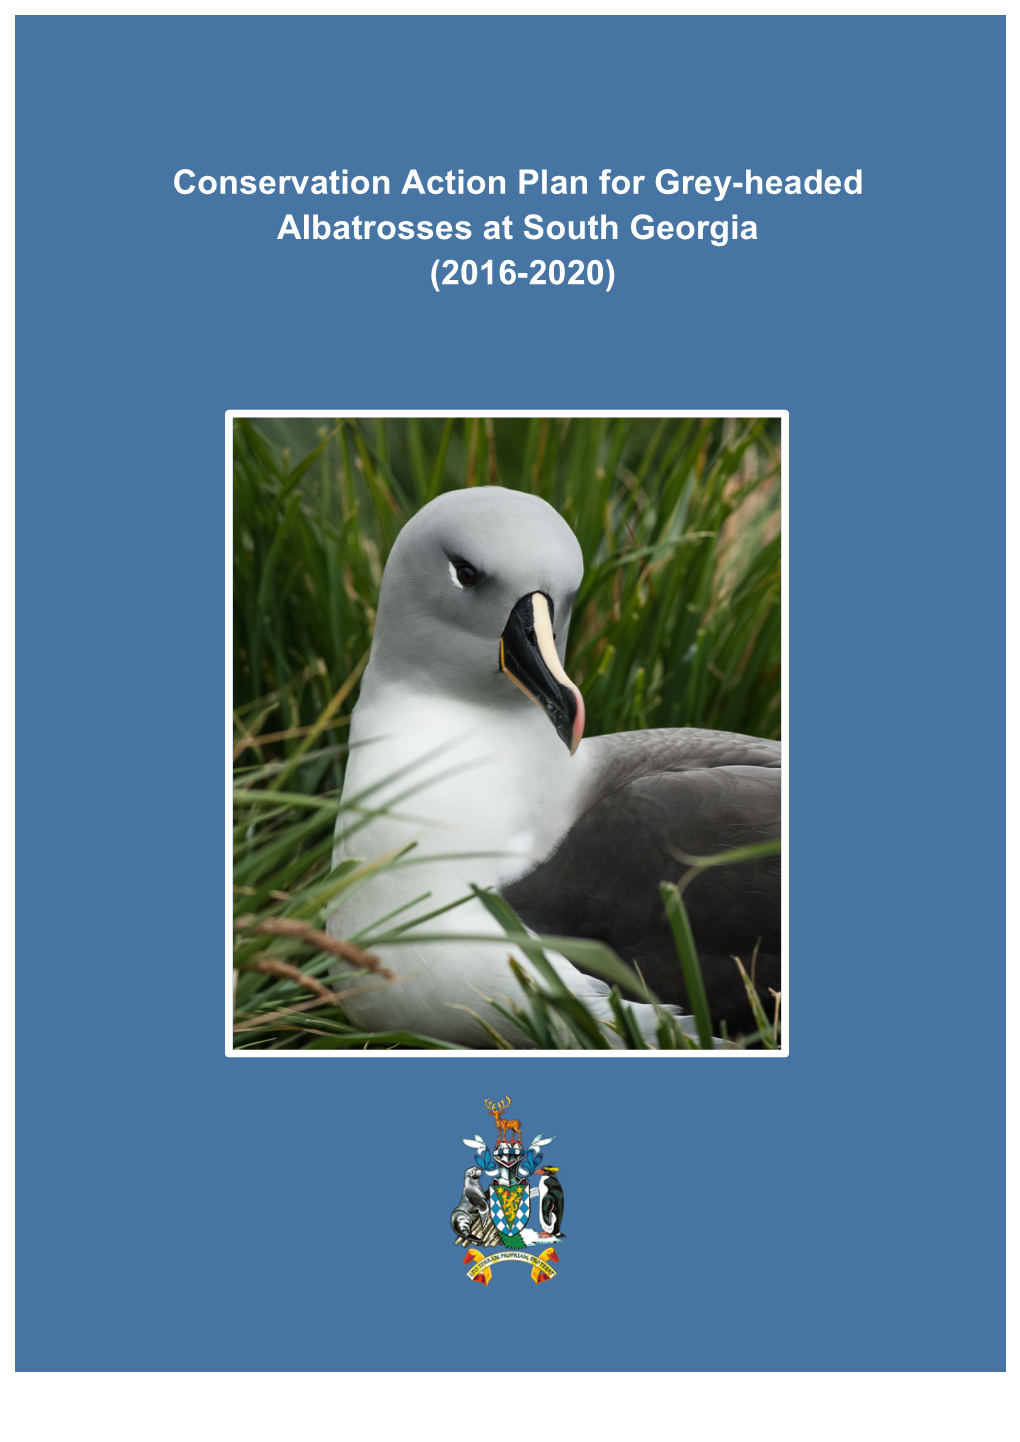 Conservation Action Plan for Grey-Headed Albatrosses at South Georgia (2016-2020)